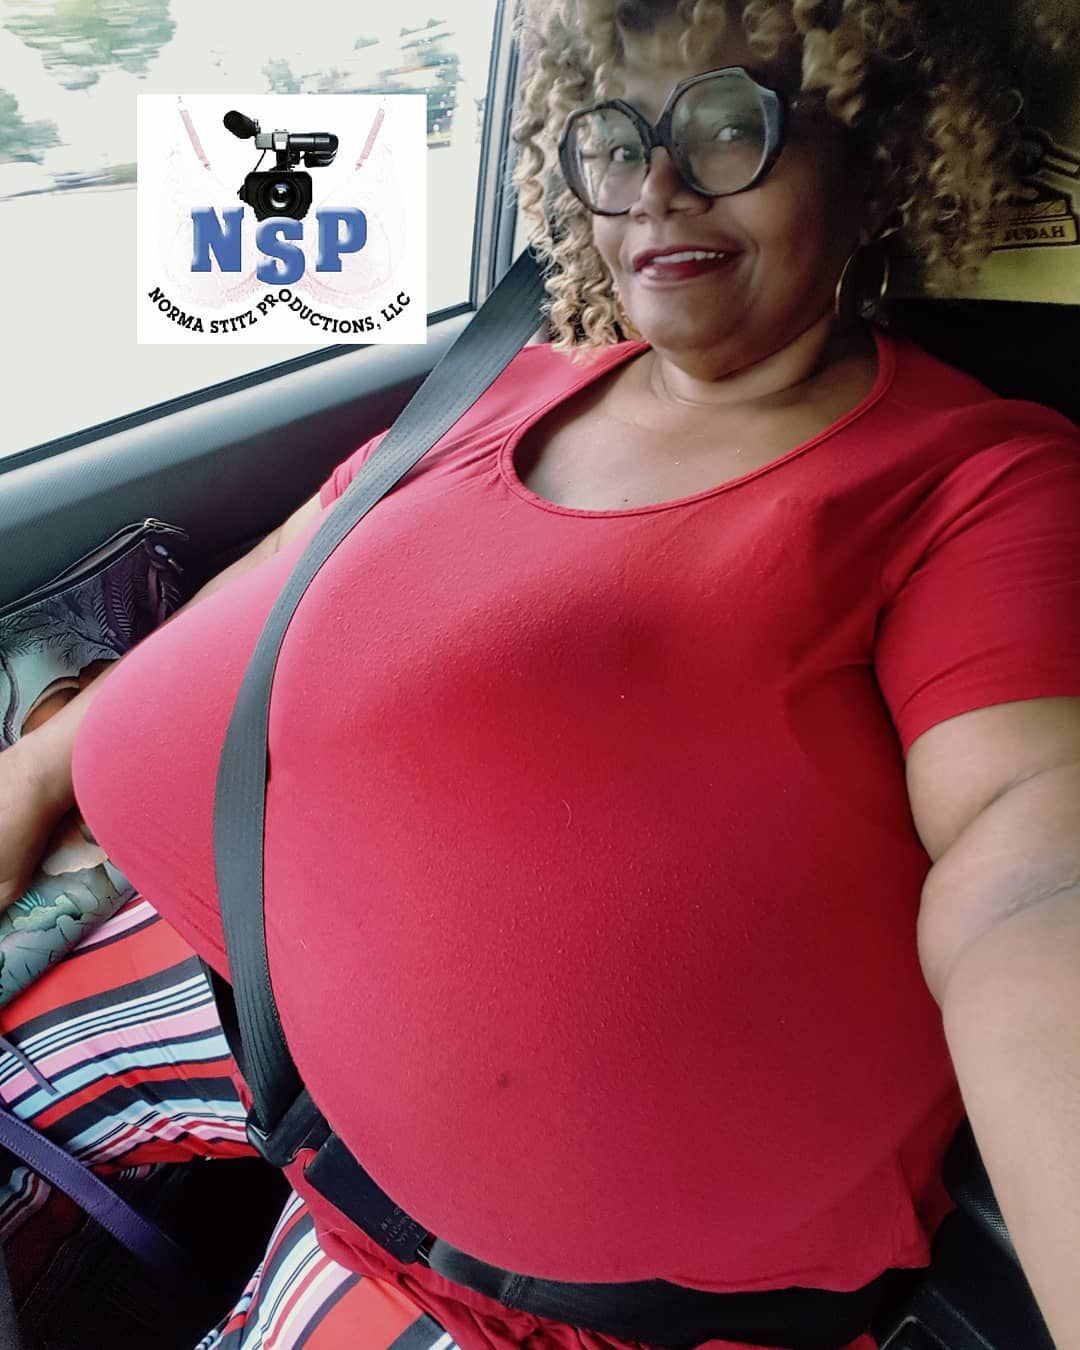 ahmed rifat recommends www norma stitz com pic